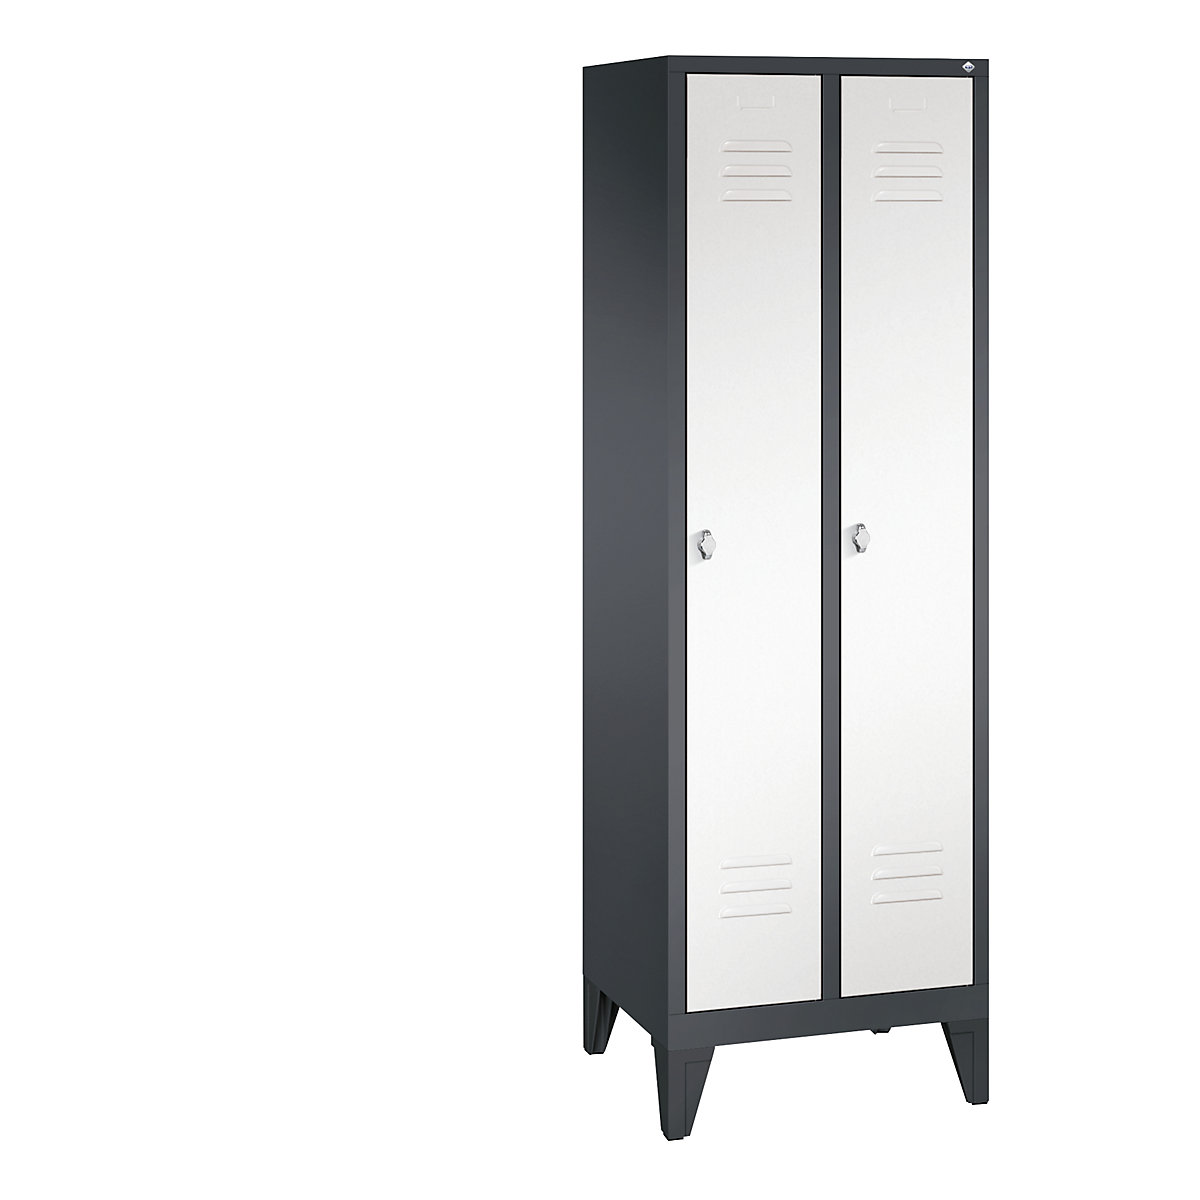 CLASSIC cloakroom locker with feet – C+P, 2 compartments, compartment width 300 mm, black grey / traffic white-12